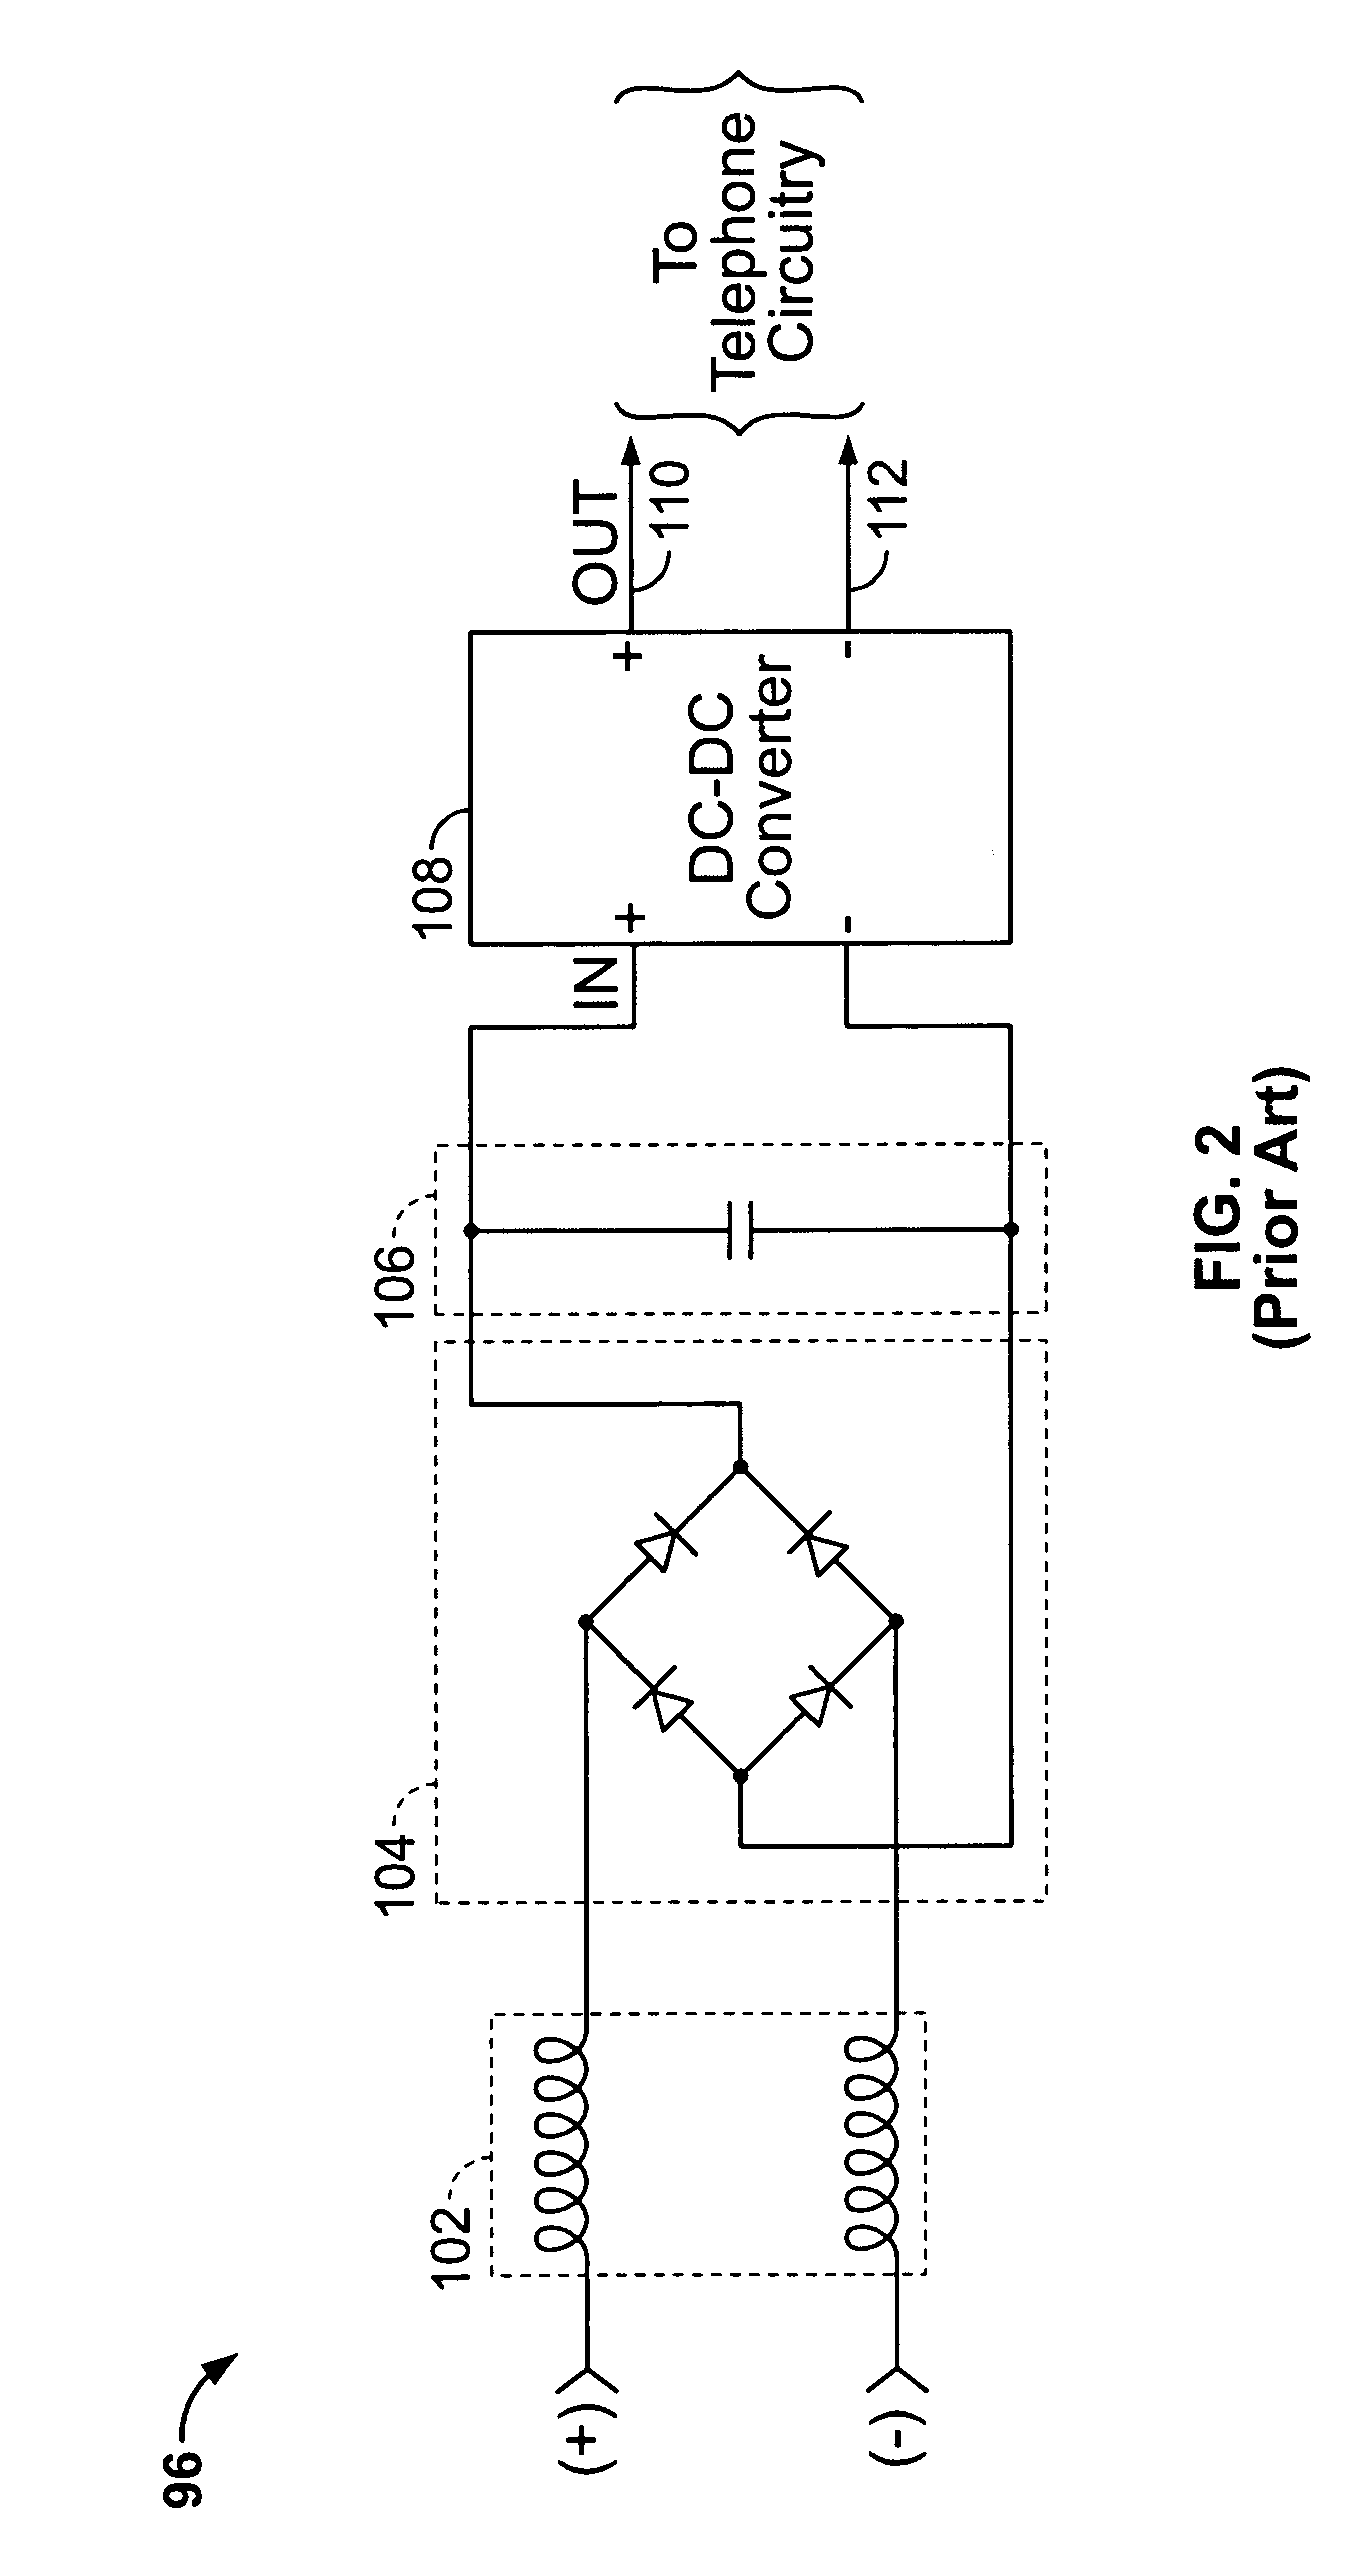 Method and apparatus for detecting a compatible phantom powered device using common mode signaling